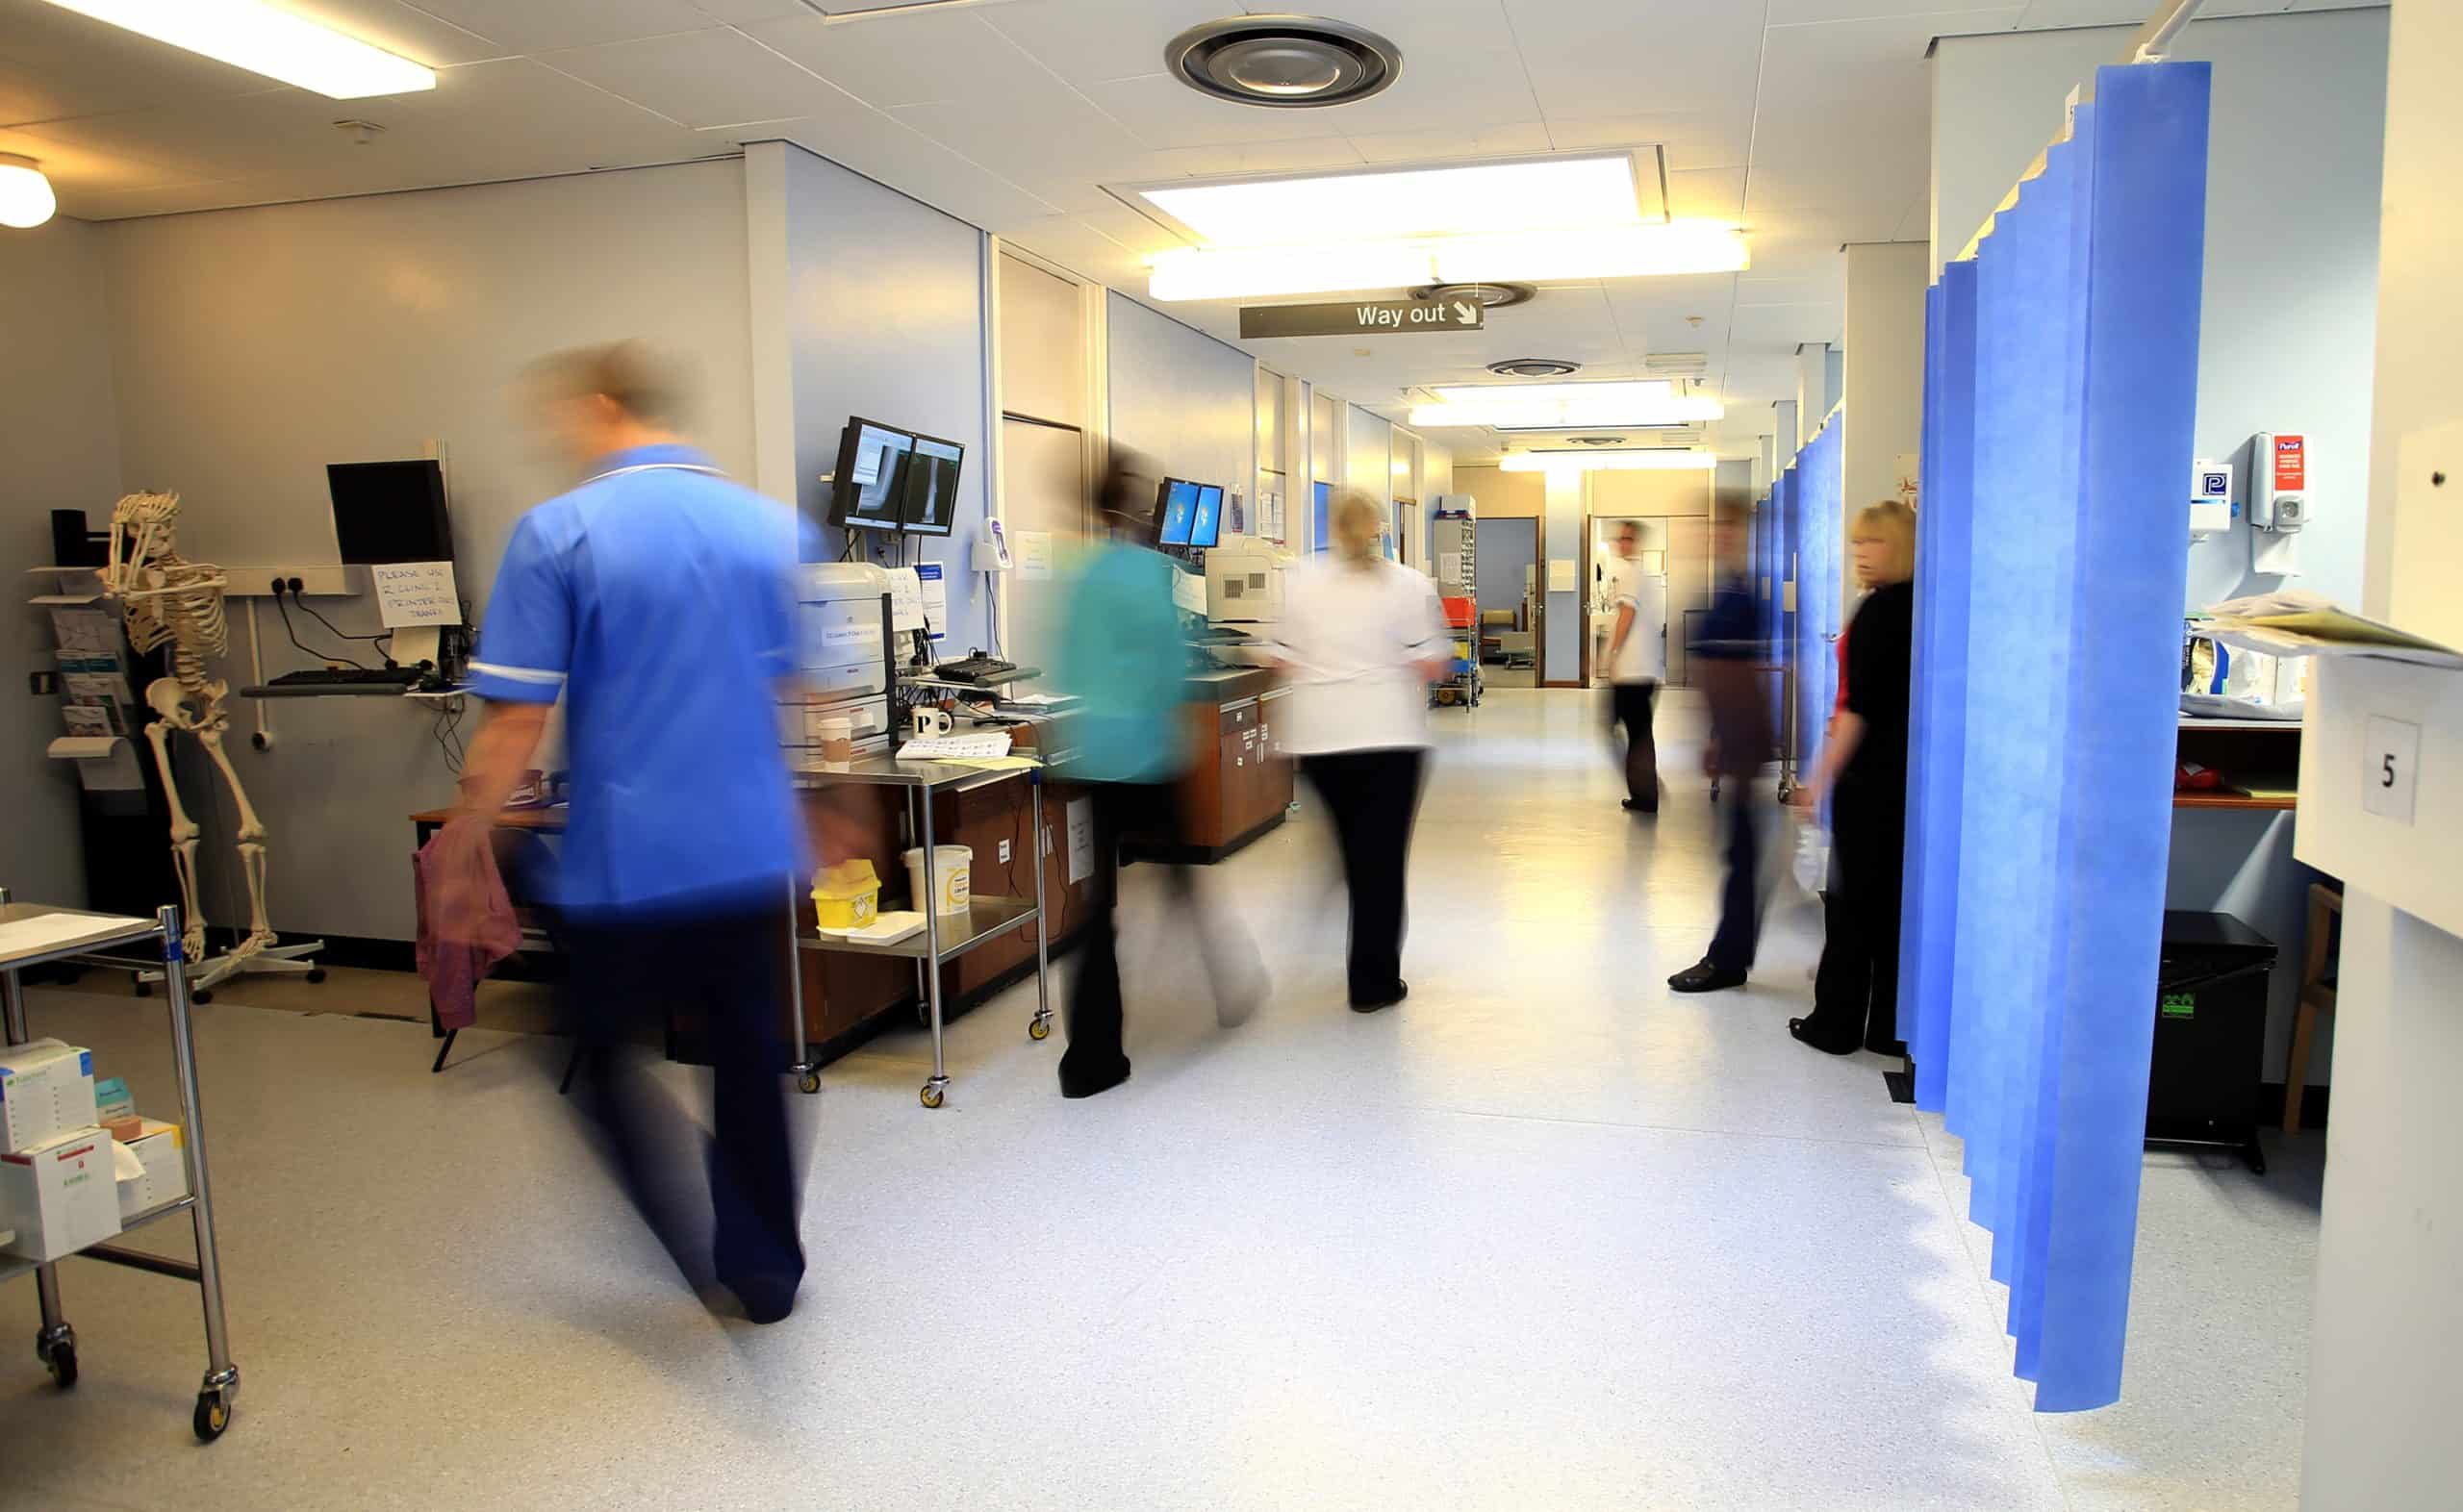 NHS waiting list hits record high of 7.2m people